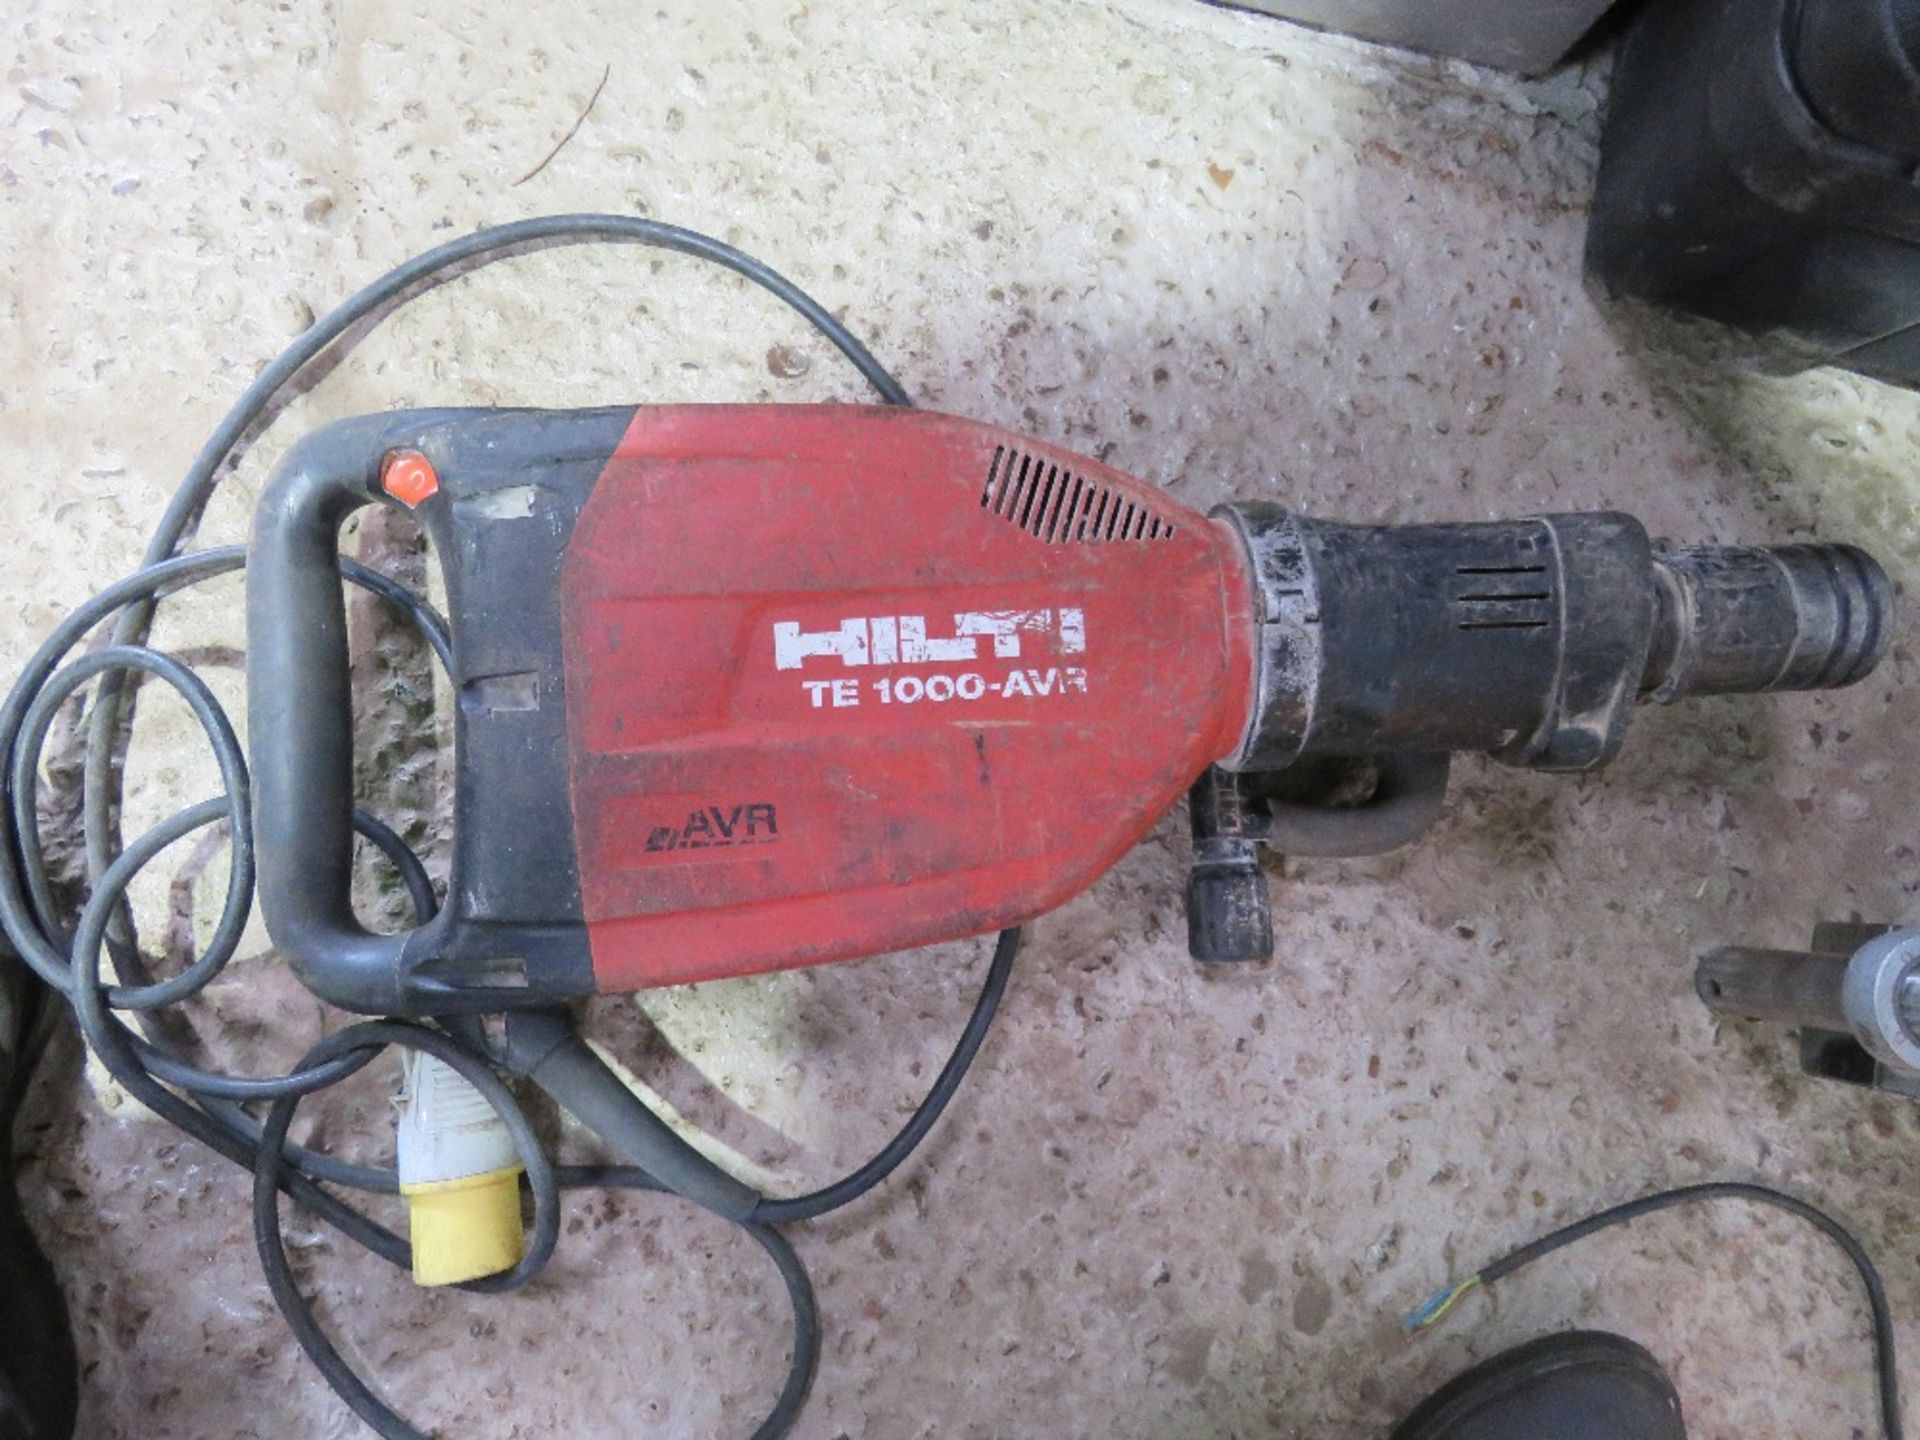 HILTI TE1000AVR HEAVY DUTY BREAKER DRILL, 110VOLT POWERED, CONDITION UNKNOWN, MAY BE INCOMPLETE/NEED